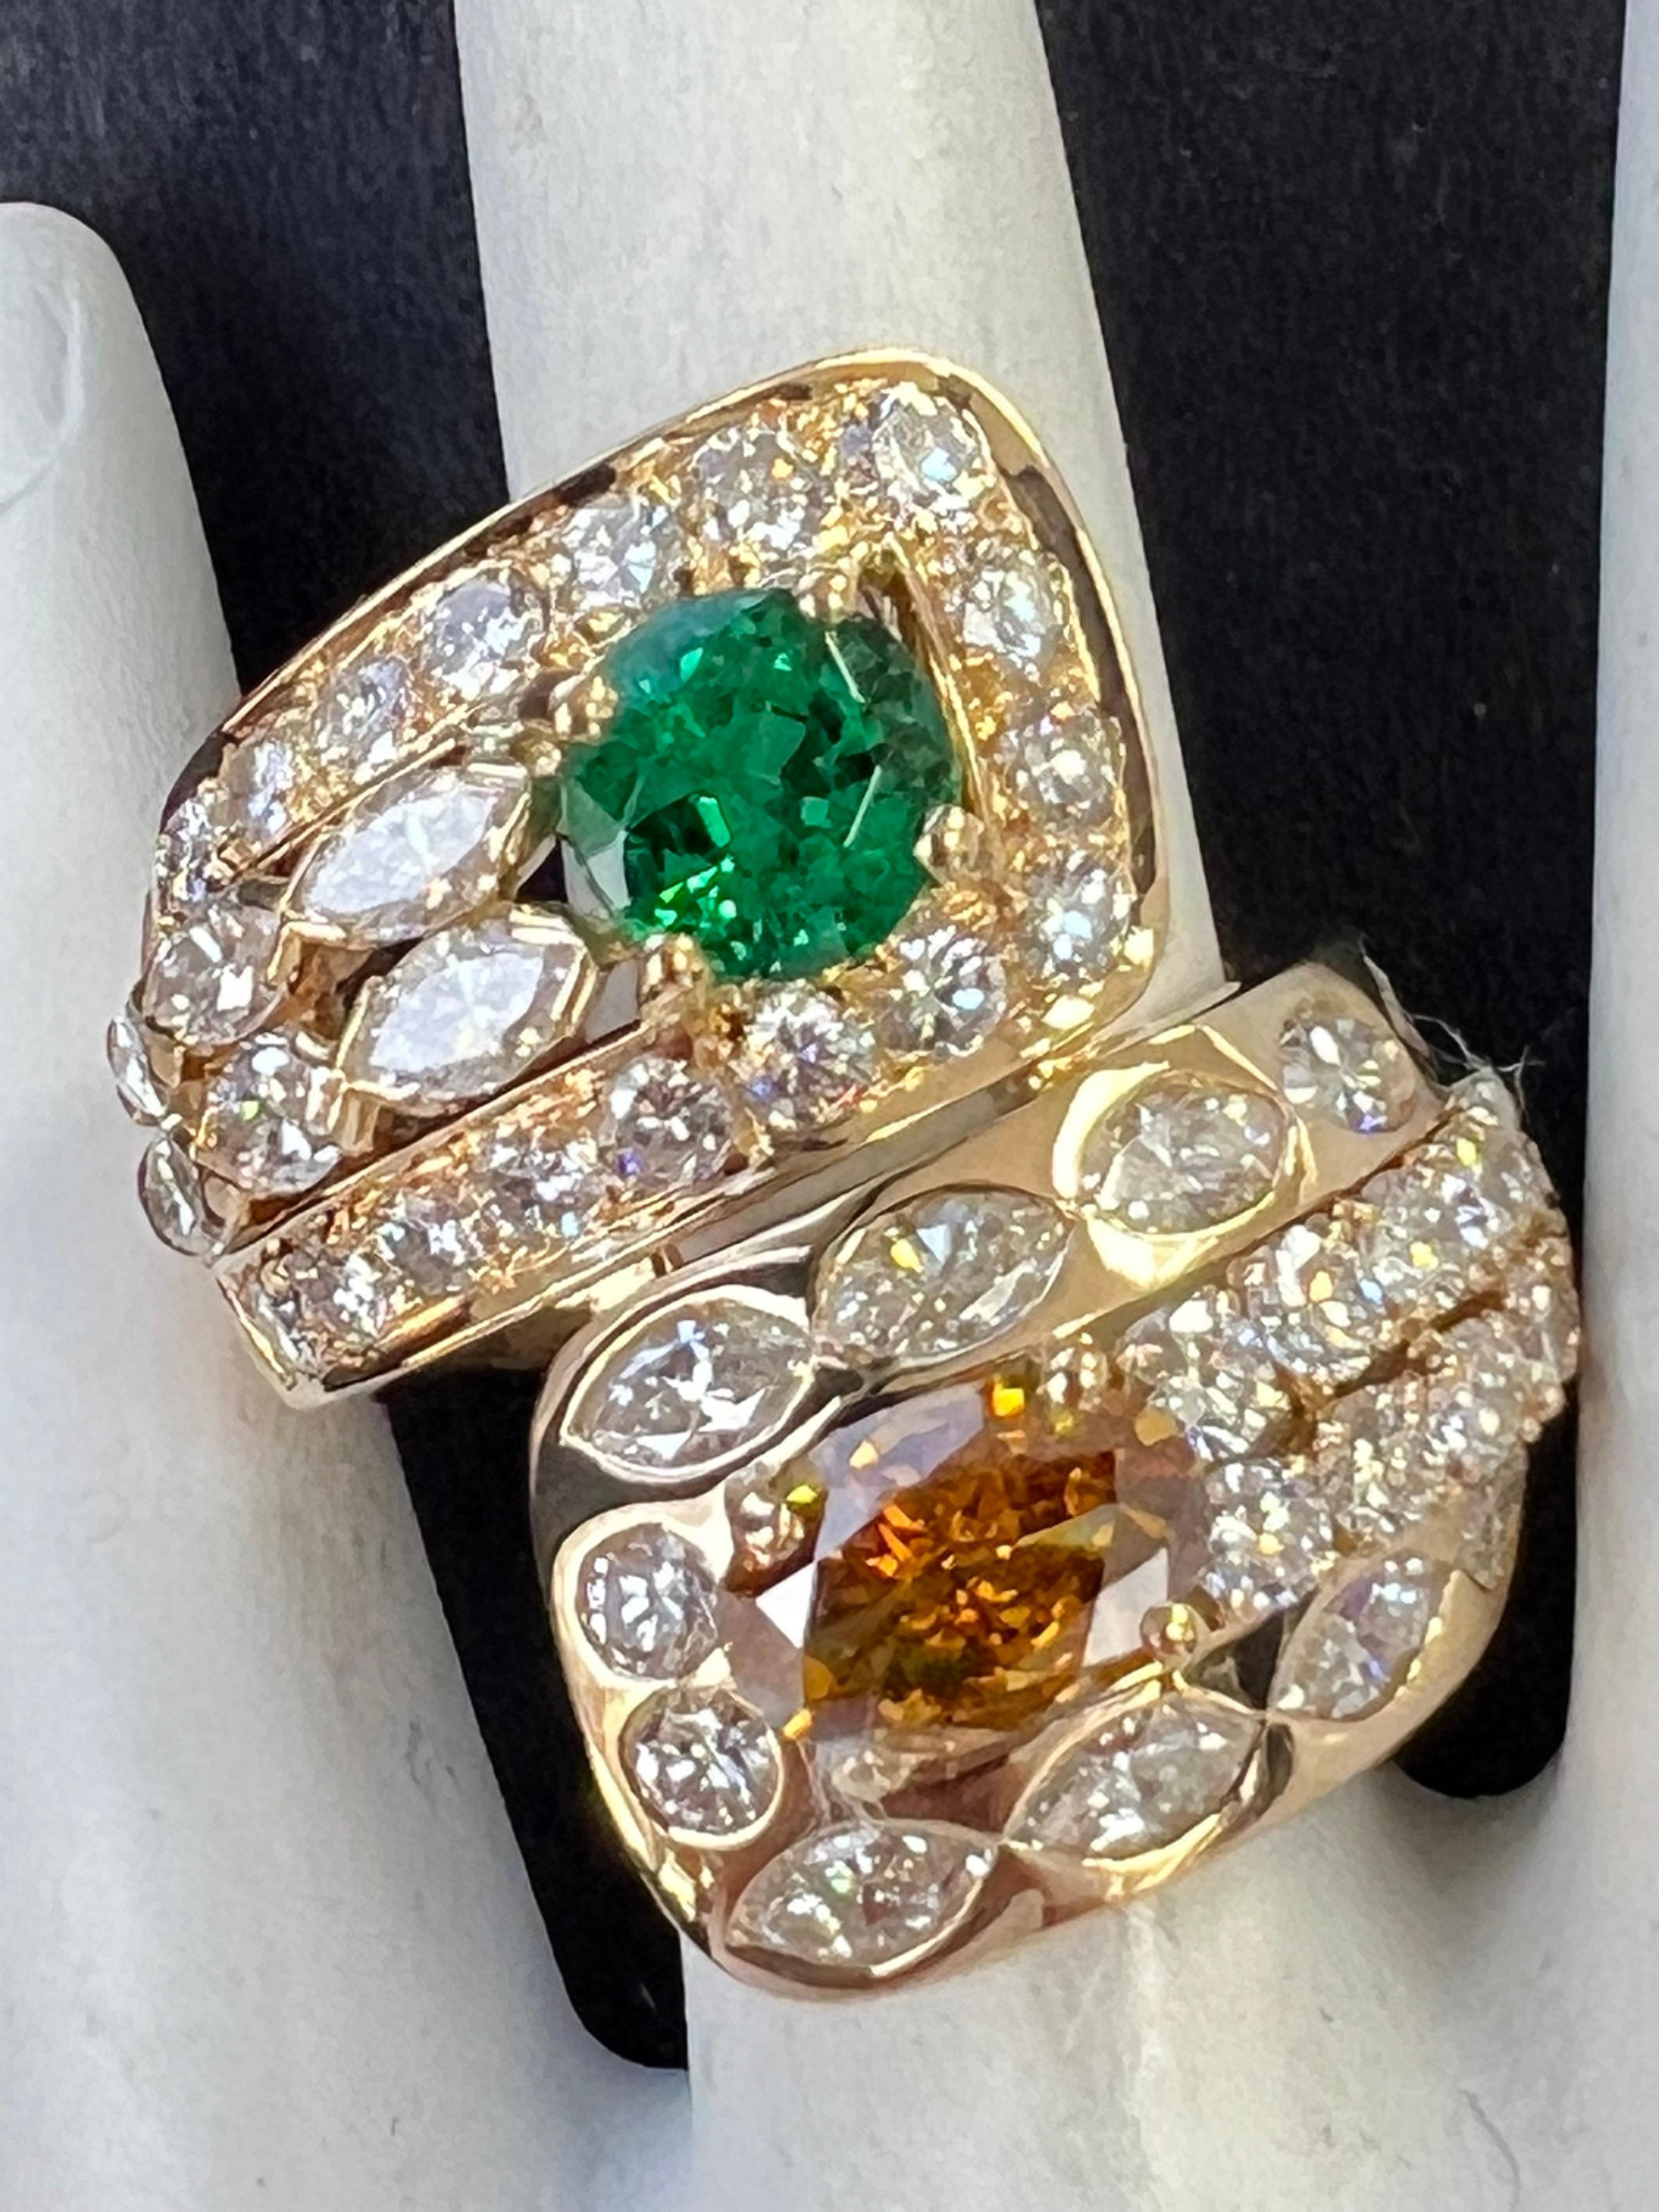 Women's Retro Gold GIA Certified 7.4 Carat Natural Emerald & Diamond Cocktail Ring, 1960 For Sale